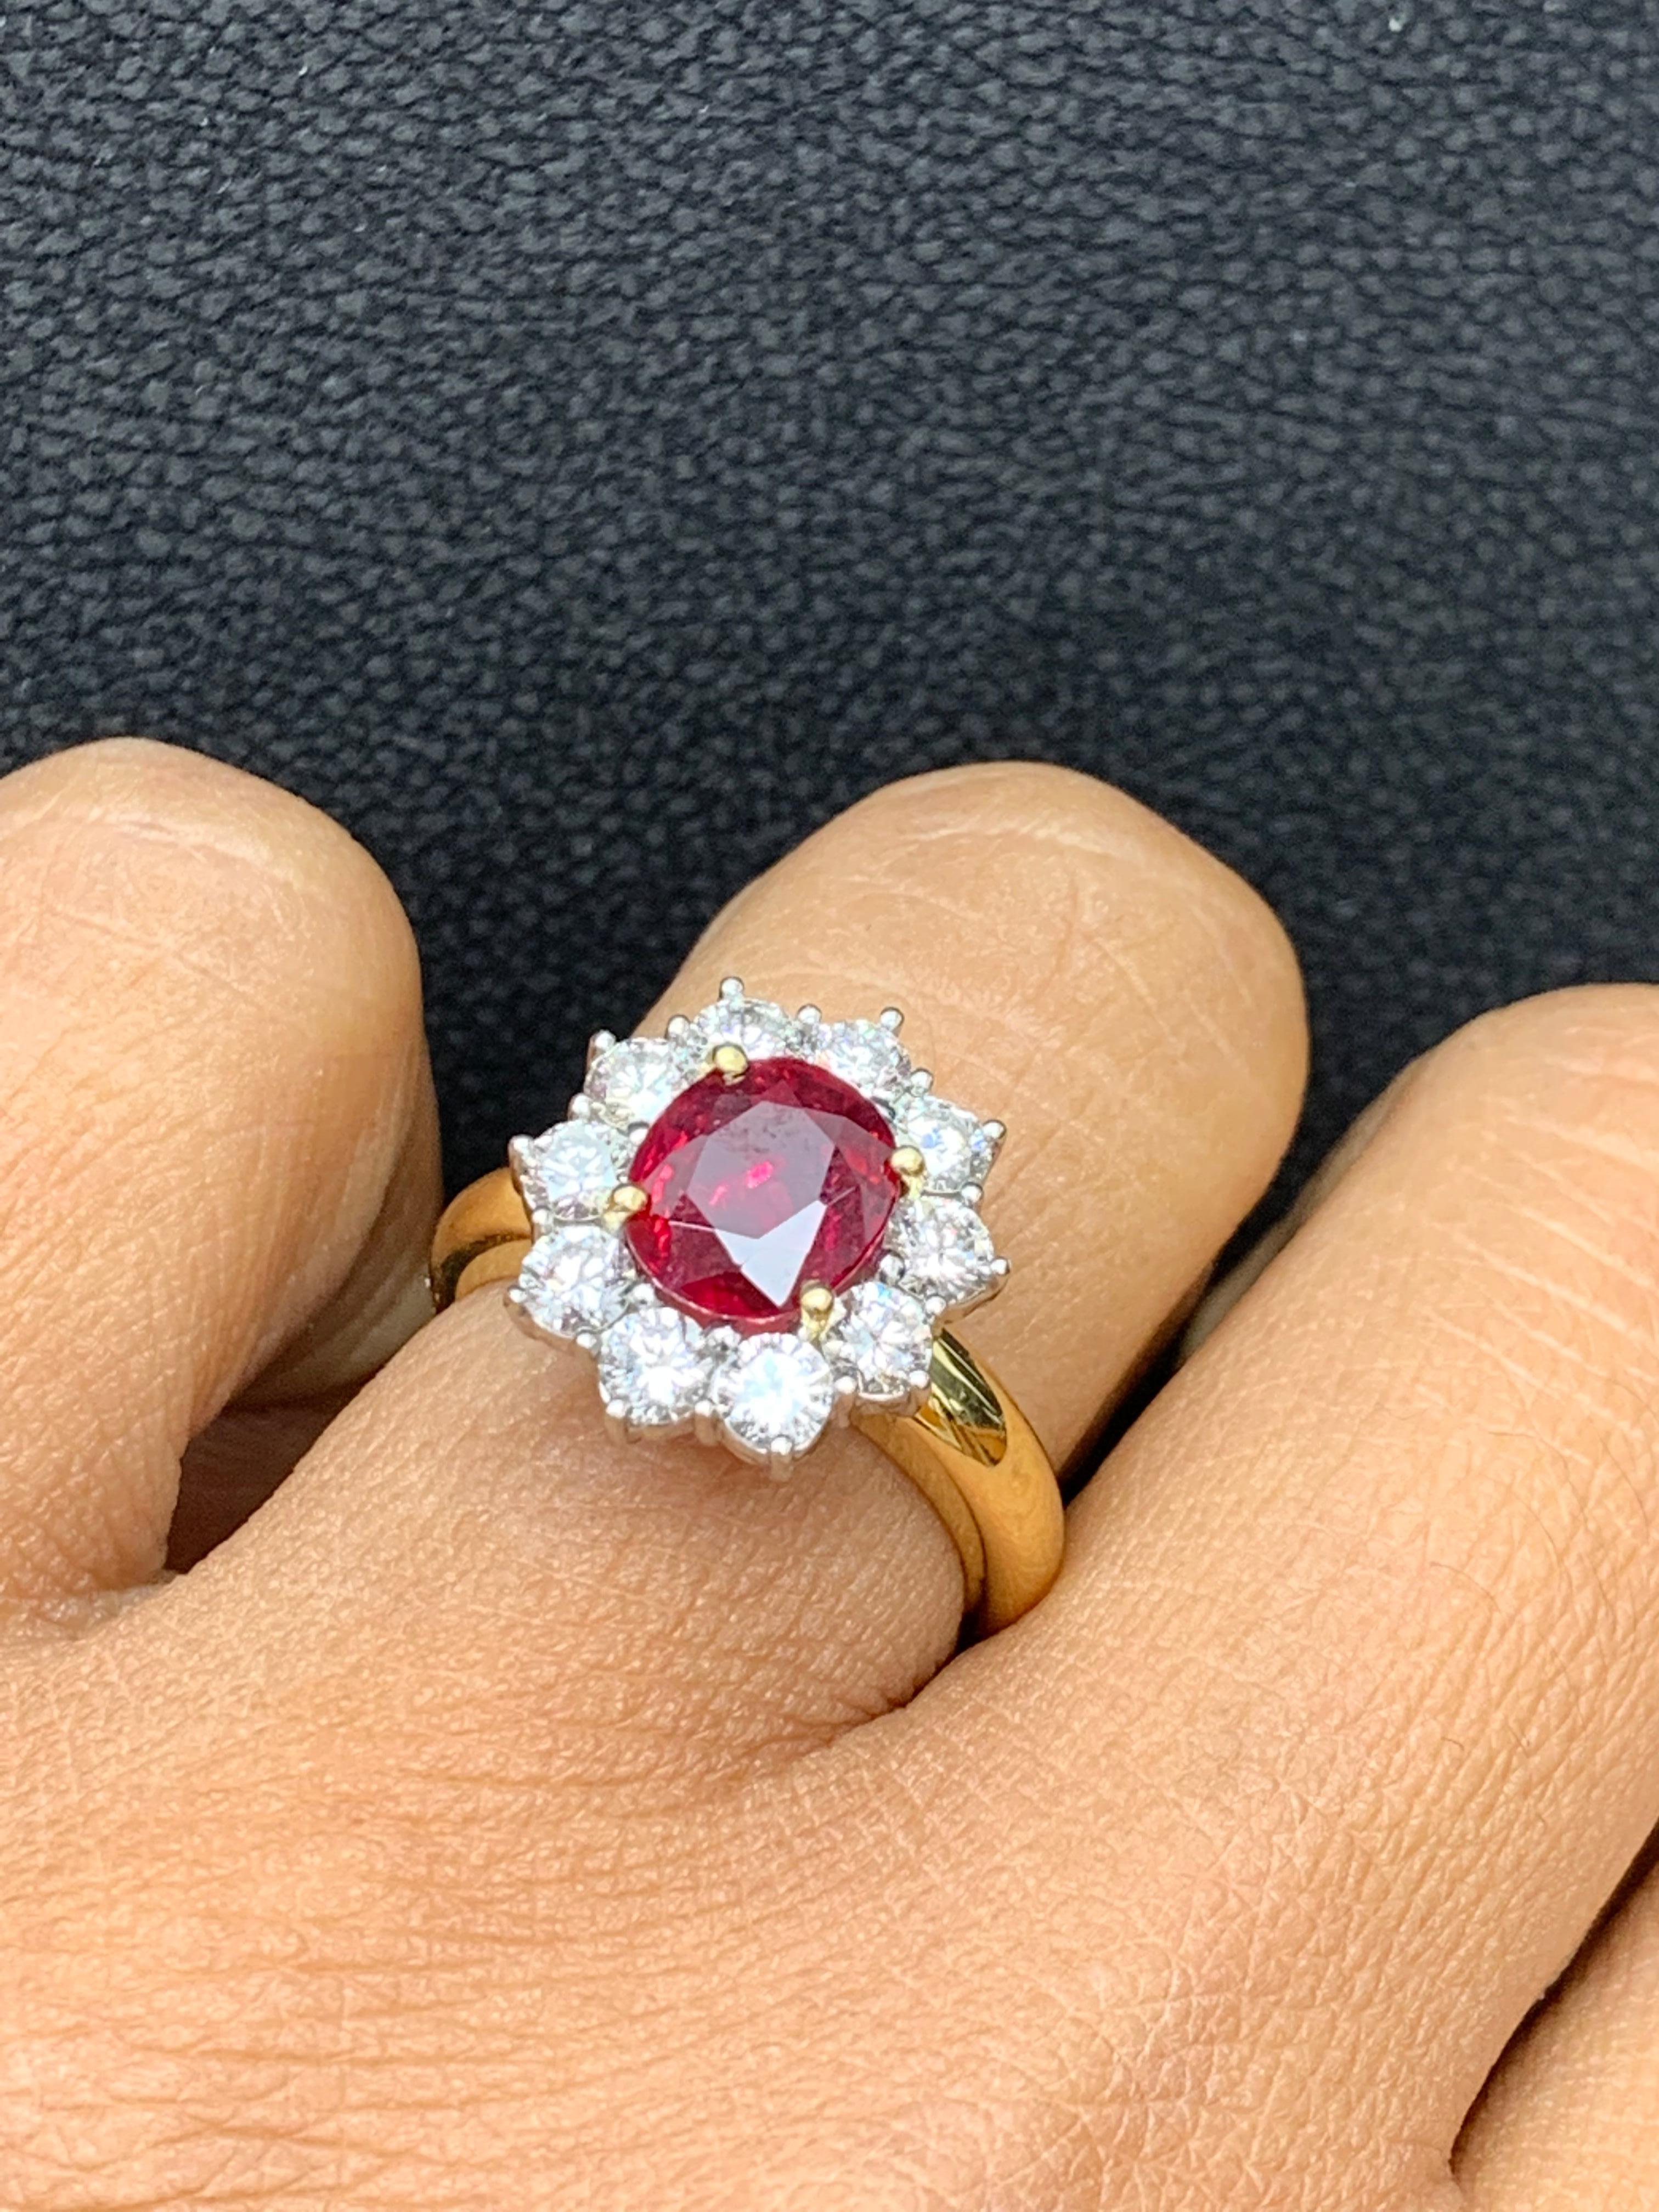 This ring features 1.03 carat of round brilliant diamonds surrounding lush red round cut Ruby weighing 2.01 carat. The ring is made in  18Kmix gold yellow and white. Ring size is 6.5 US